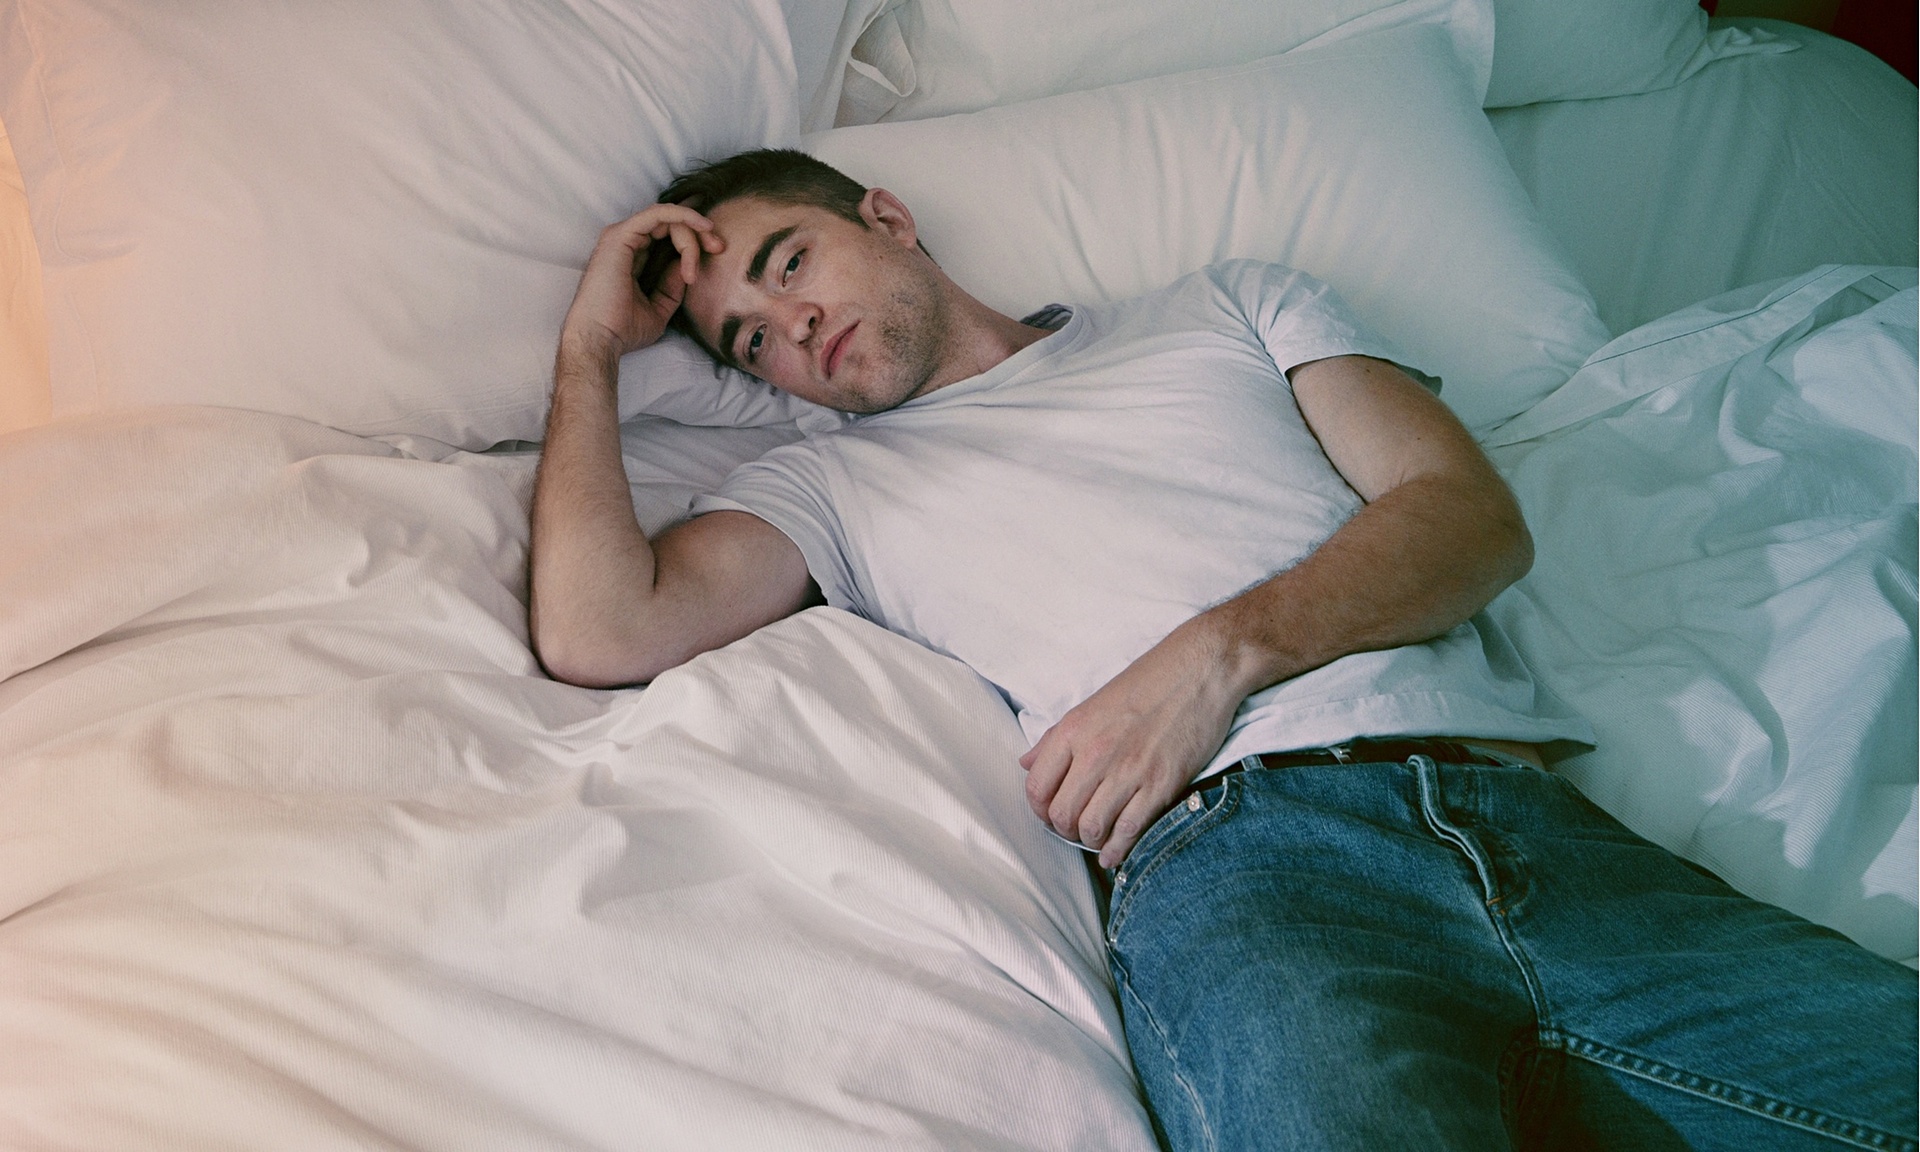 Robert Pattinson The Guardian Observer 2015 Photo Shoot Bed Picture